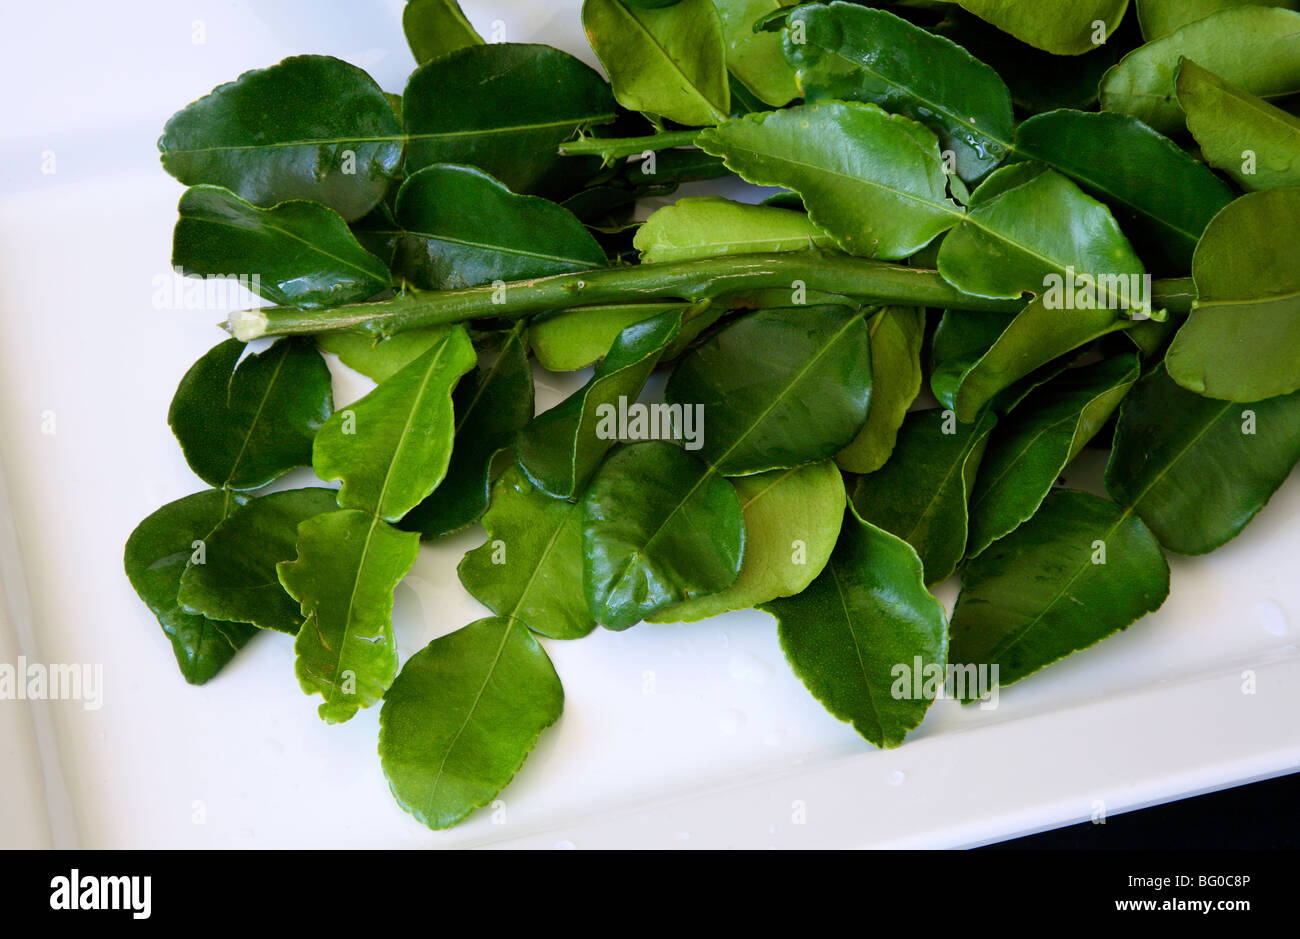 Leaves of the kaffir lime (limau purut),  native to Indonesia, Malaysia, and Thailand, for culinary and medicinal uses Stock Photo